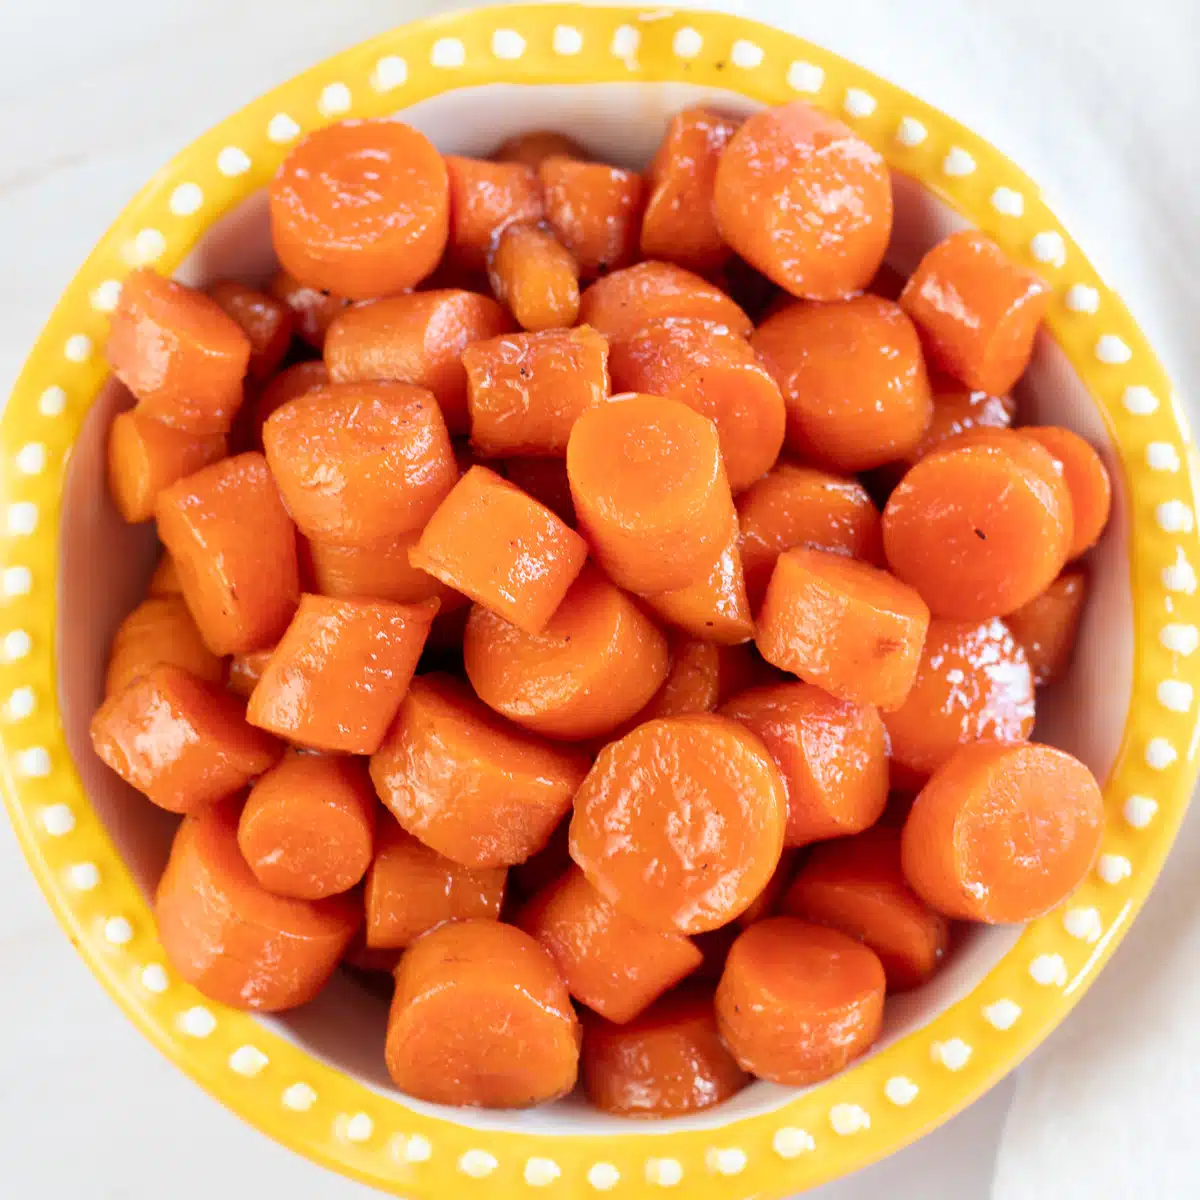 Square image of a bowl of candied carrots.